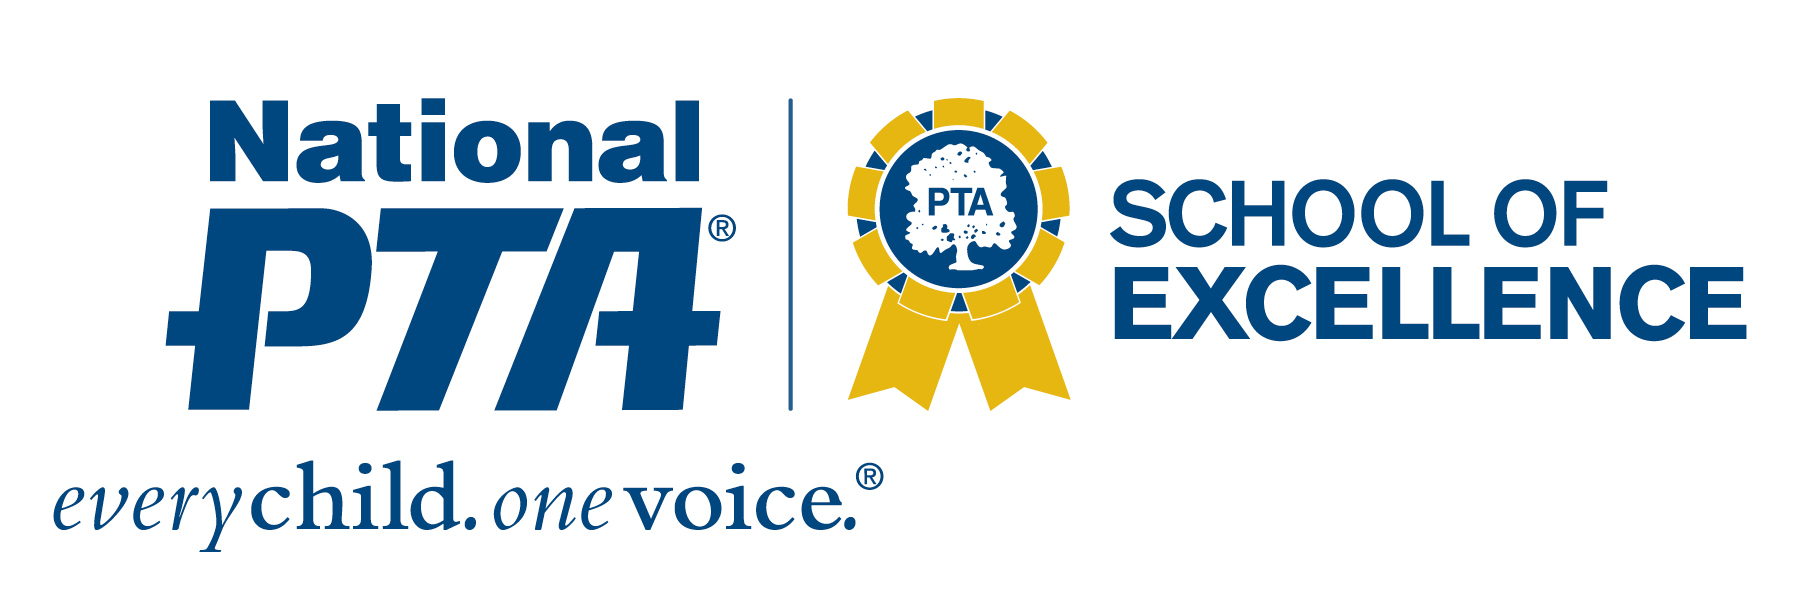 National PTA School of Excellence. Every child. One voice.